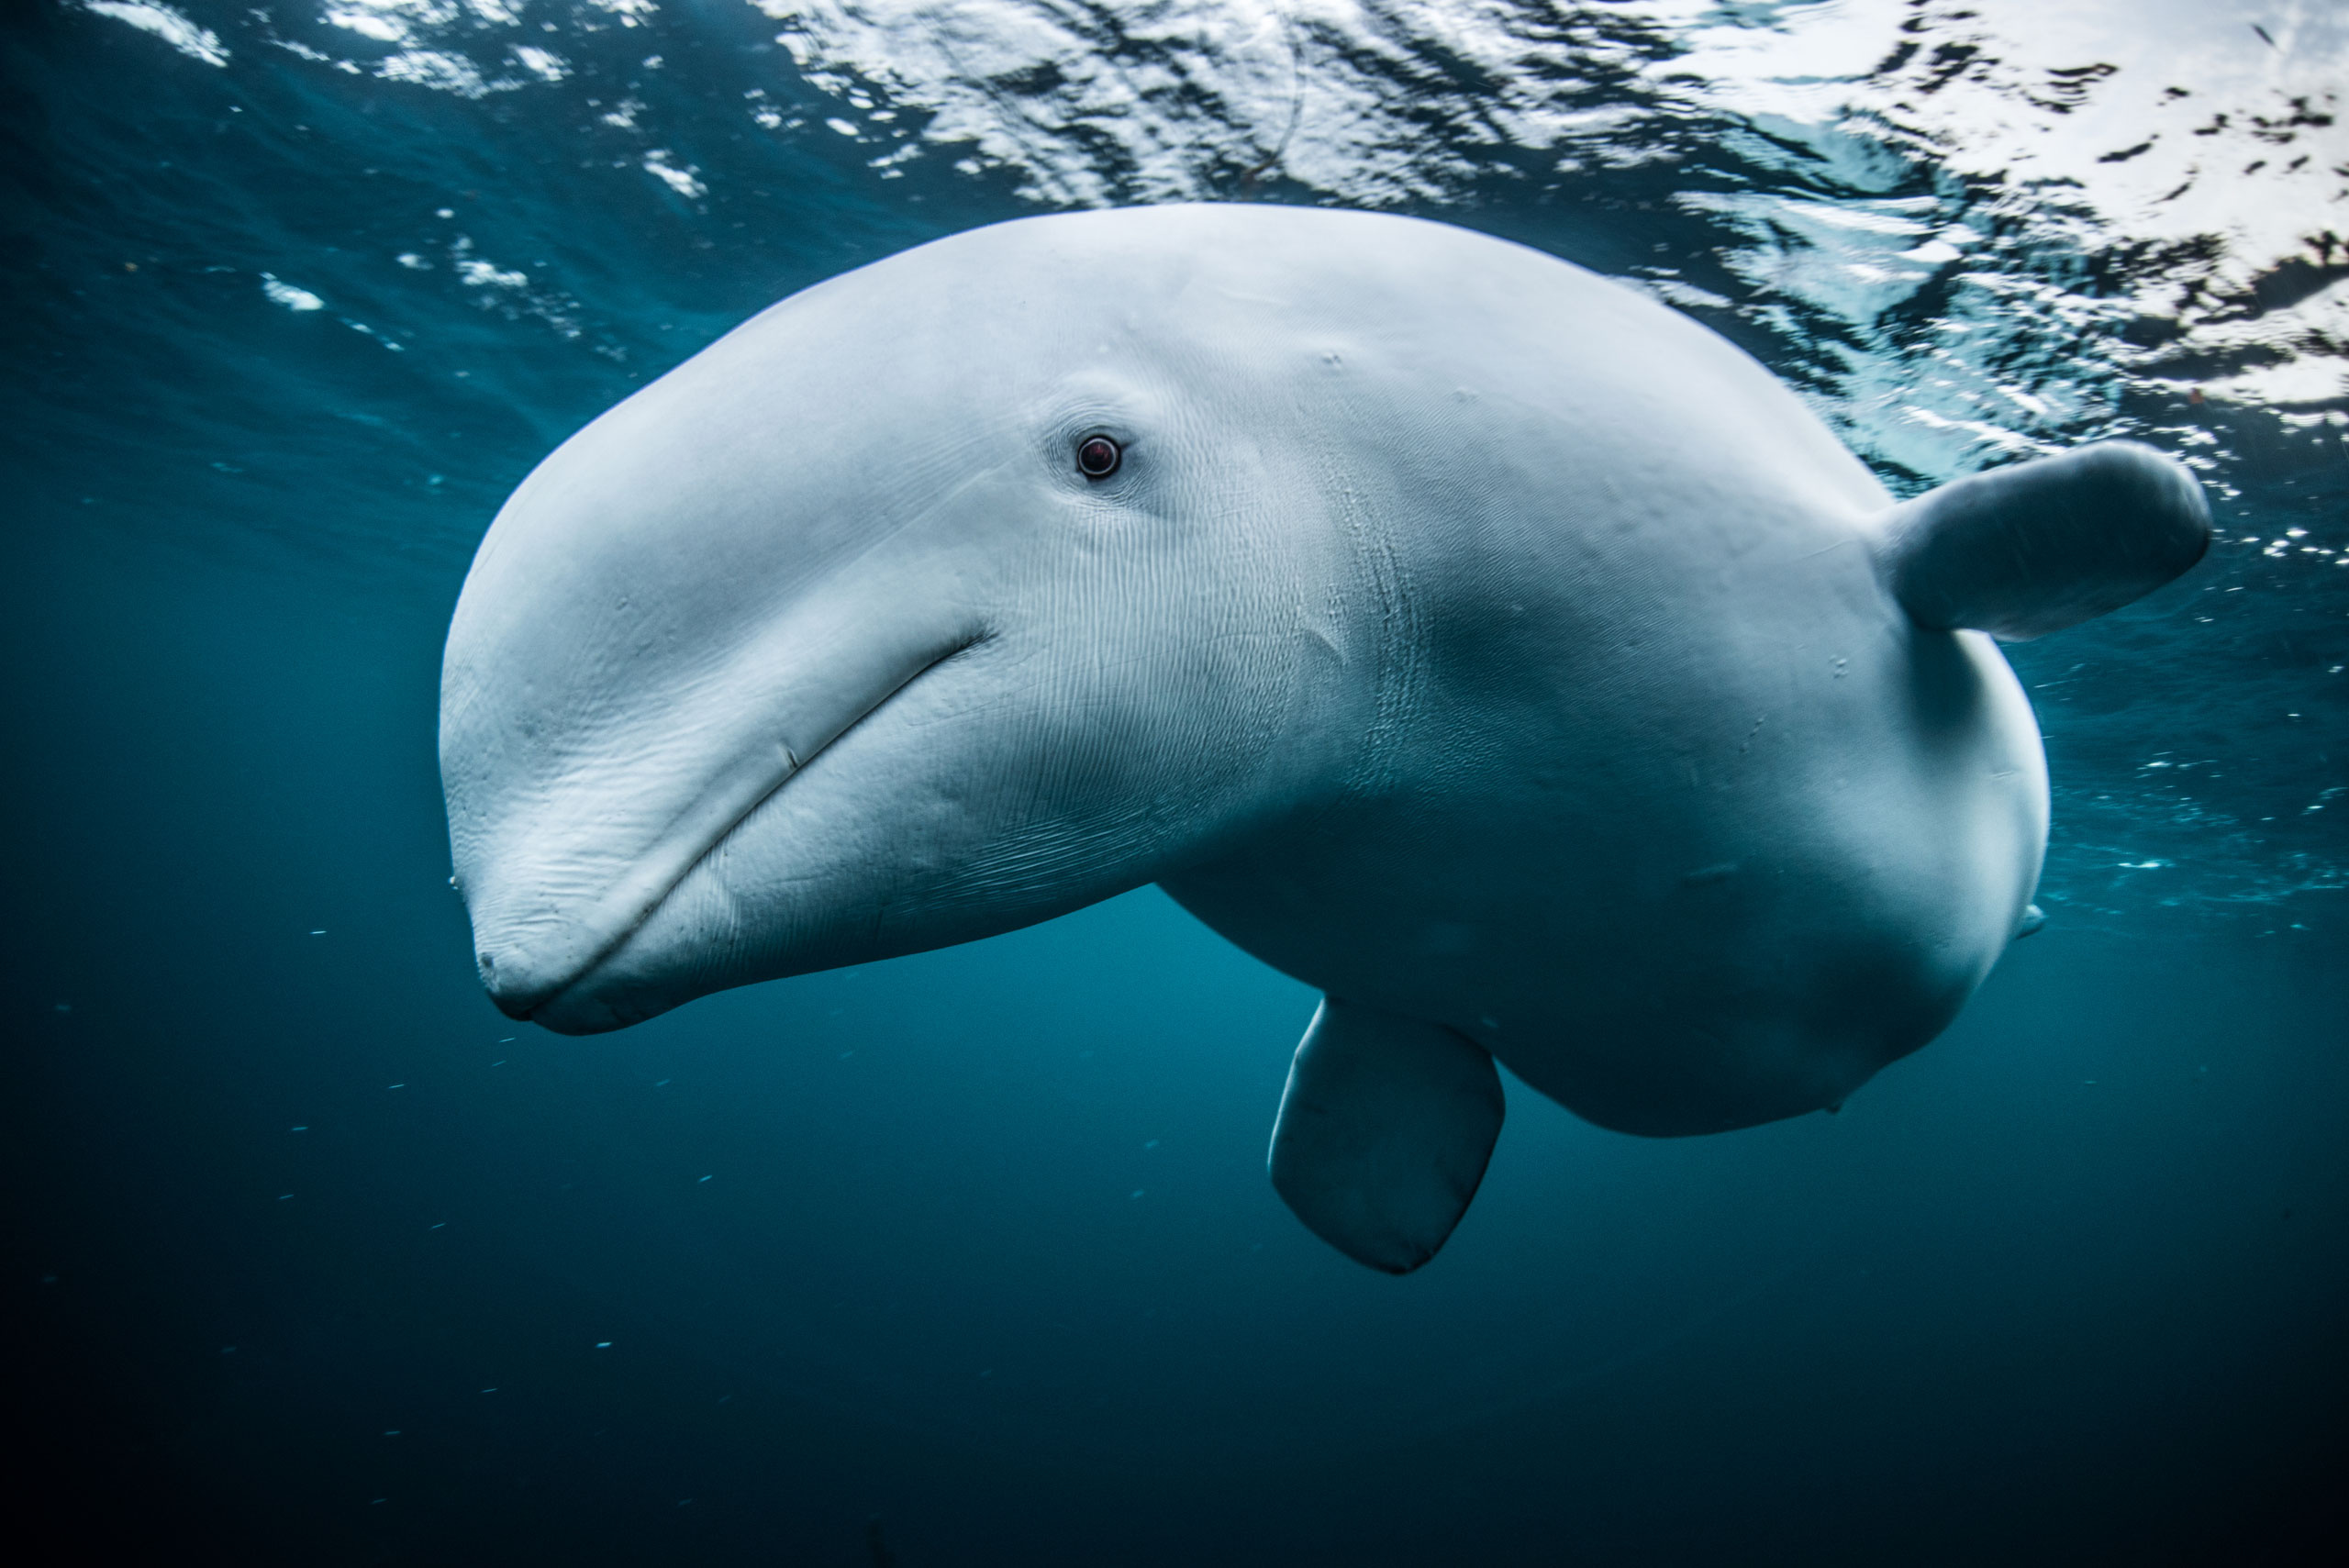 Beluga Whale, Lost beluga's story, Interview with whale biologist, Saving our marine ecosystems, 2560x1710 HD Desktop